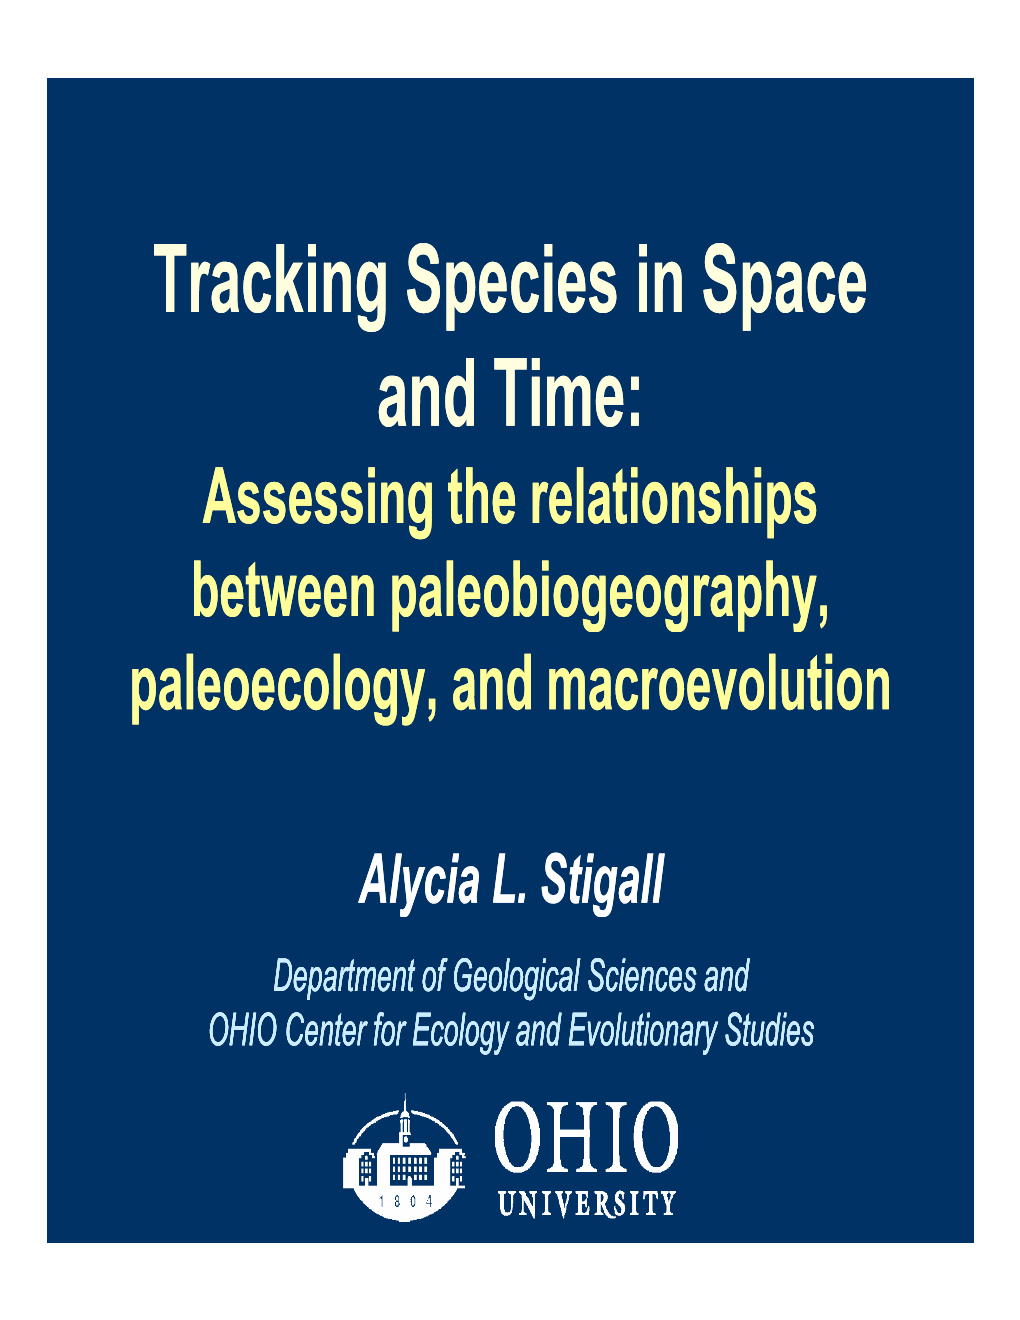 Tracking Species in Space and Time: Assessing the Relationships Between Paleobiogeography, Paleoecology, and Macroevolution